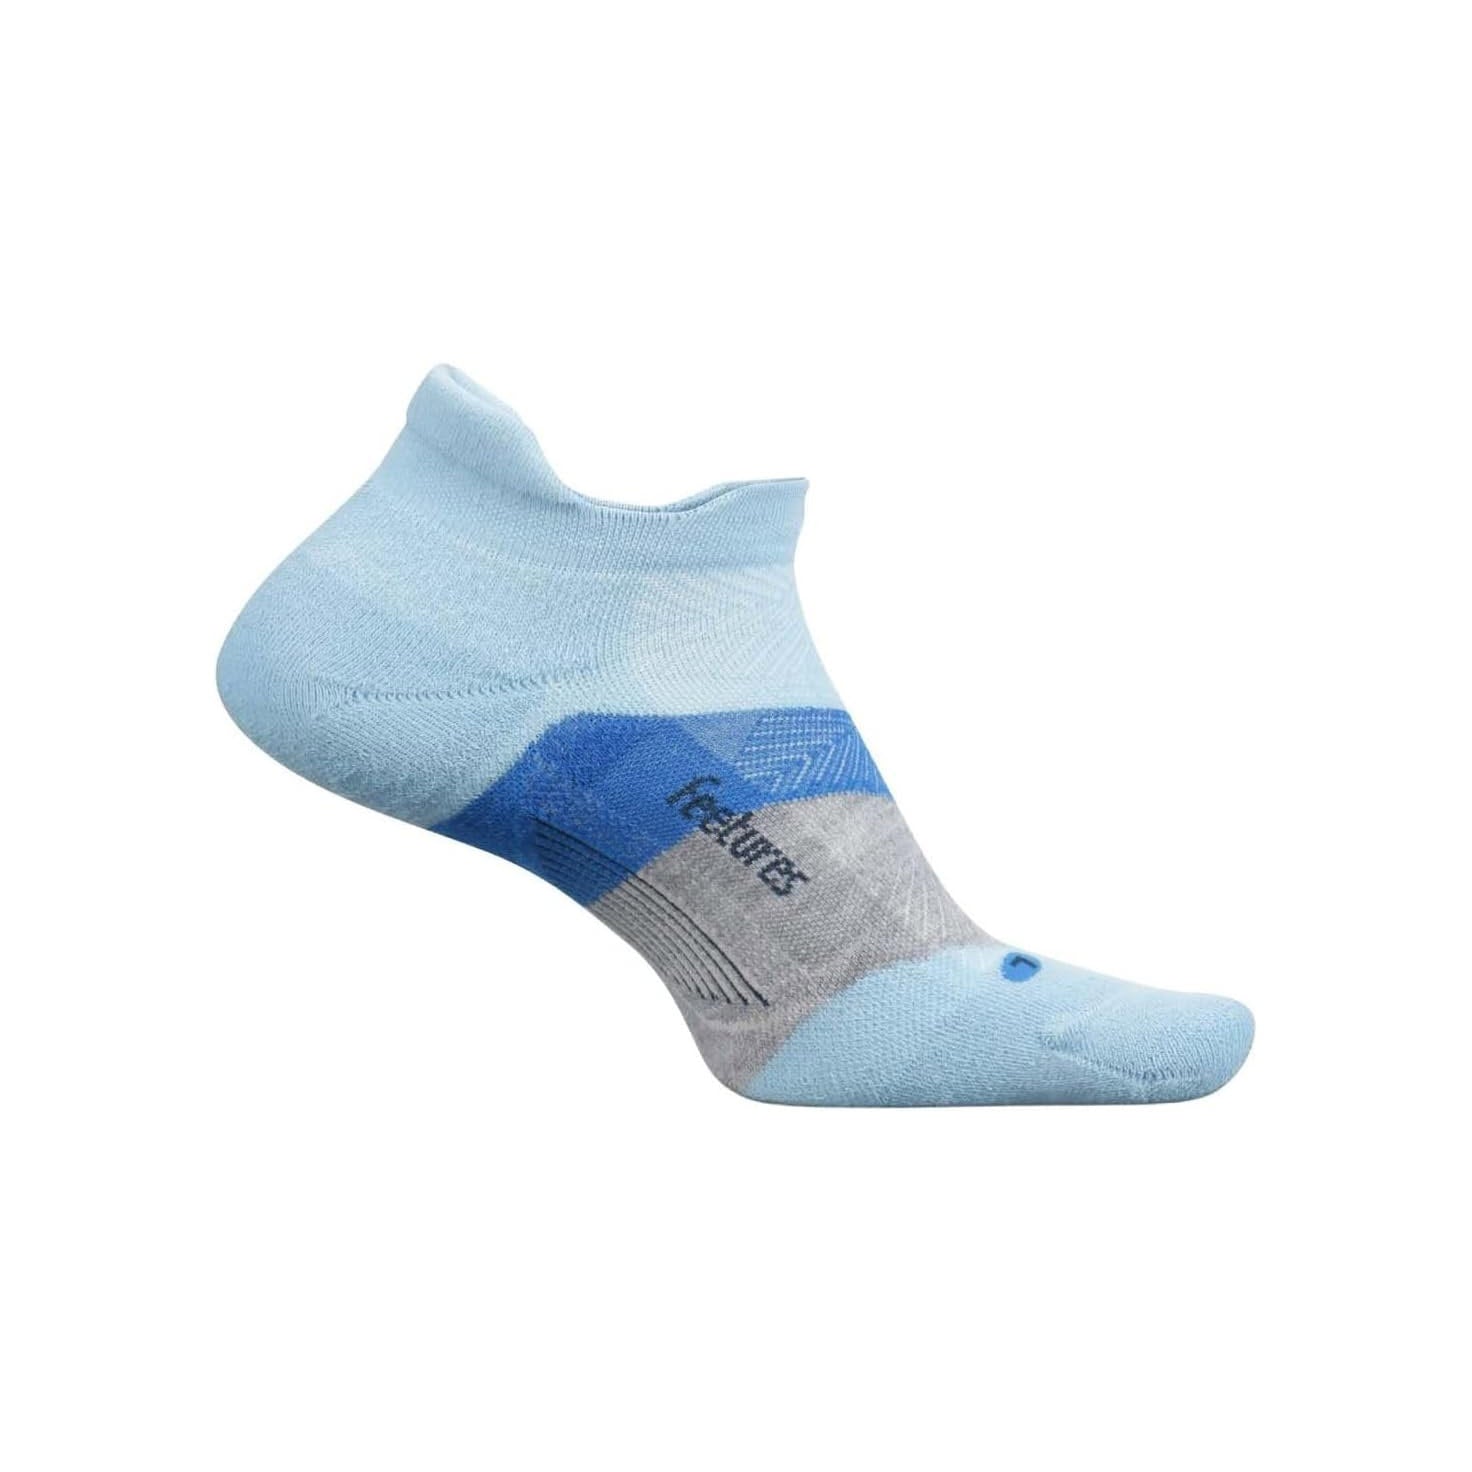 A single Feetures ELITE MAX CUSHION NO SHOW TAB BIG SKY BL ankle sock with a gray and blue patterned design and arch support, featuring the word "features" on the side.